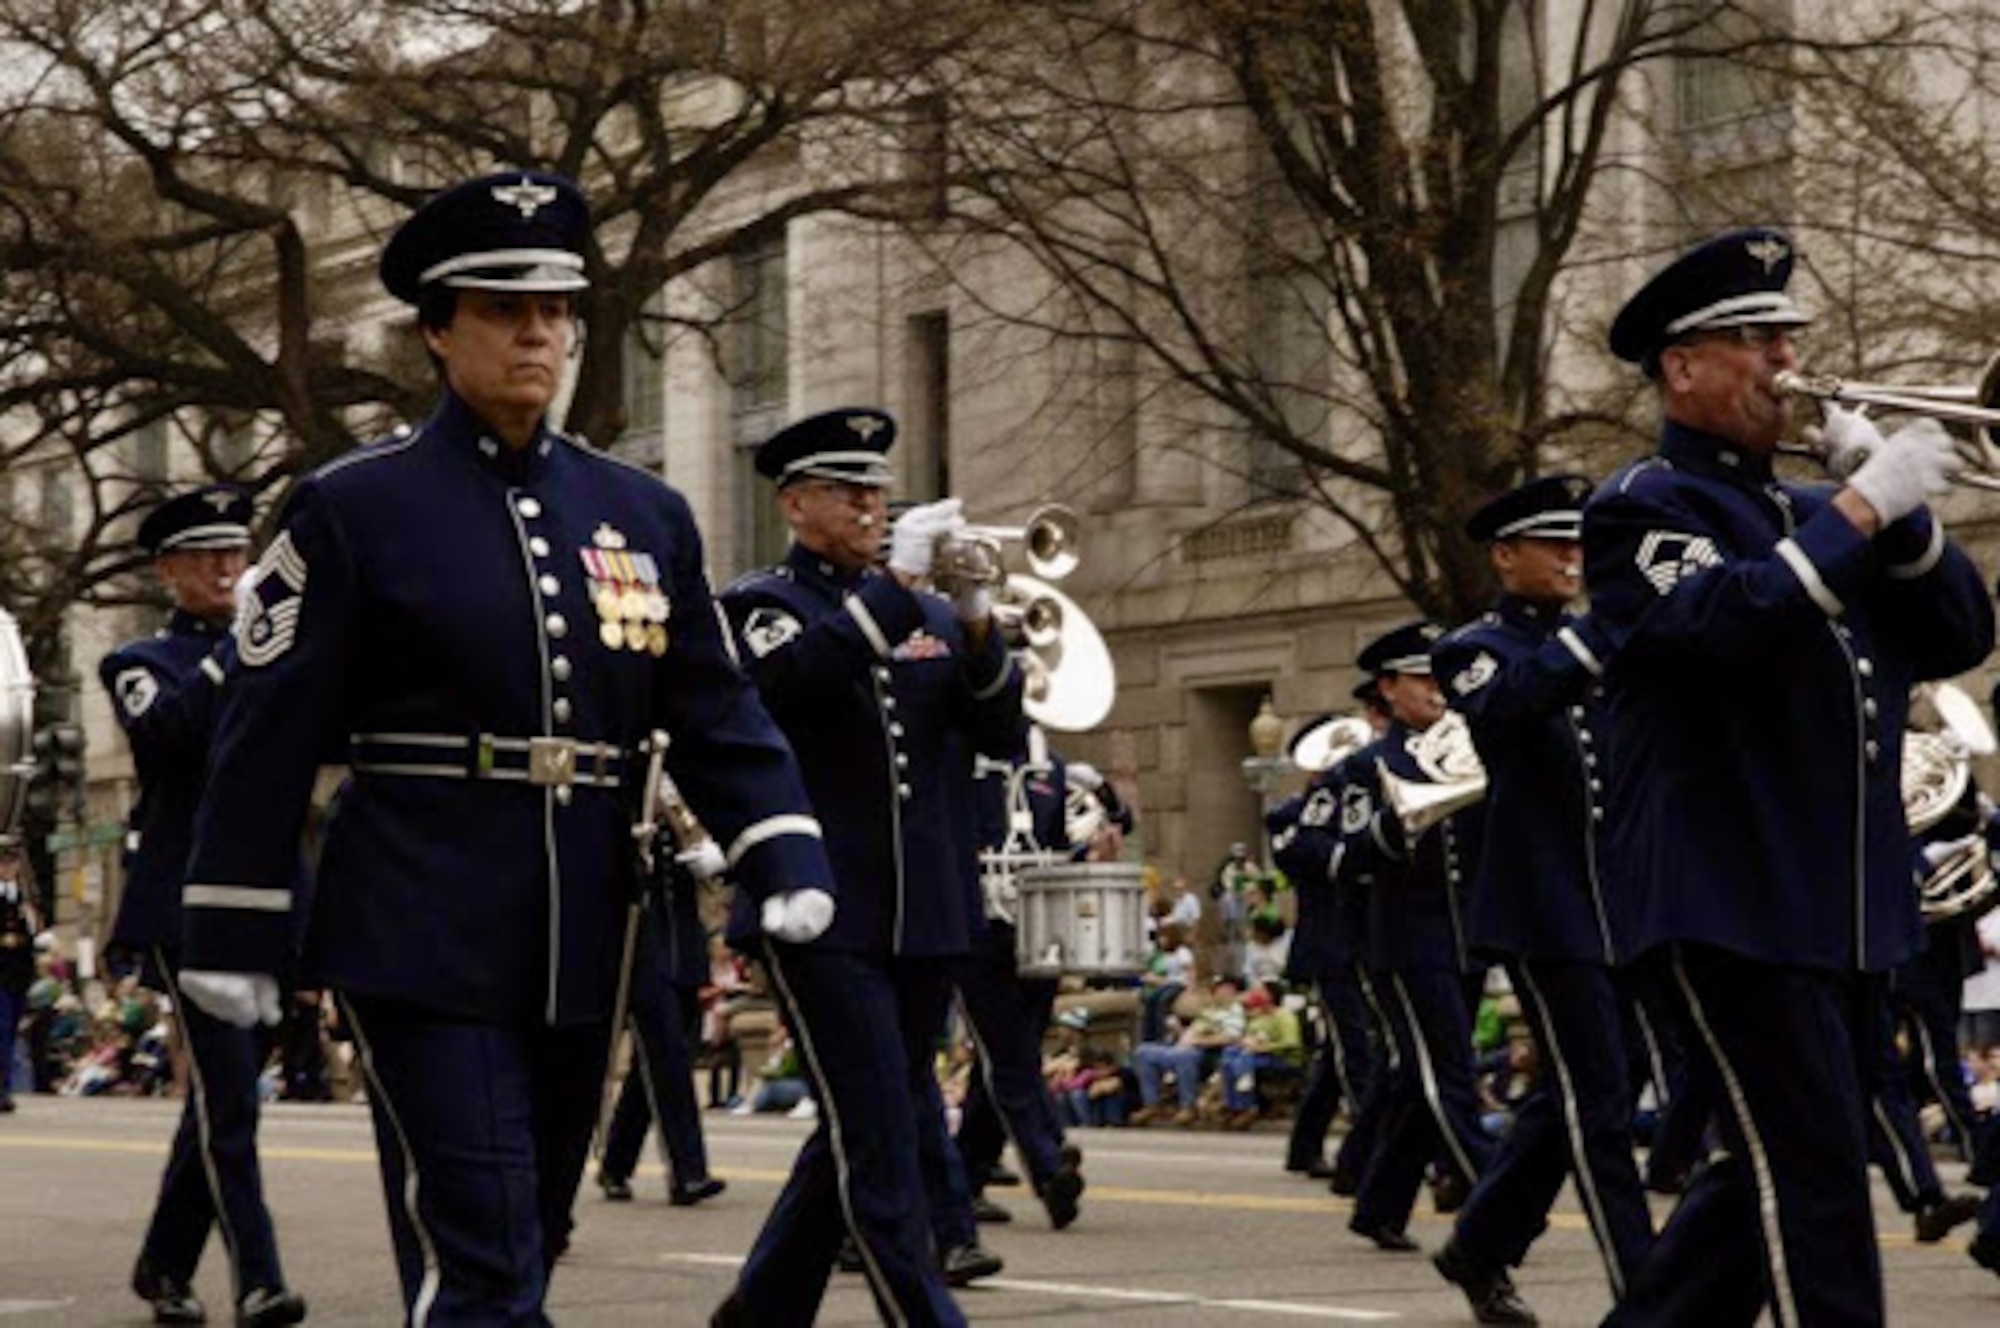 Chief Gartner marches alongside The U.S. Air Force Band in the 2006 St. Patrick’s Day parade. She was the only Chief Enlisted Manager to don this exclusive uniform, complete with sword and scabbard.